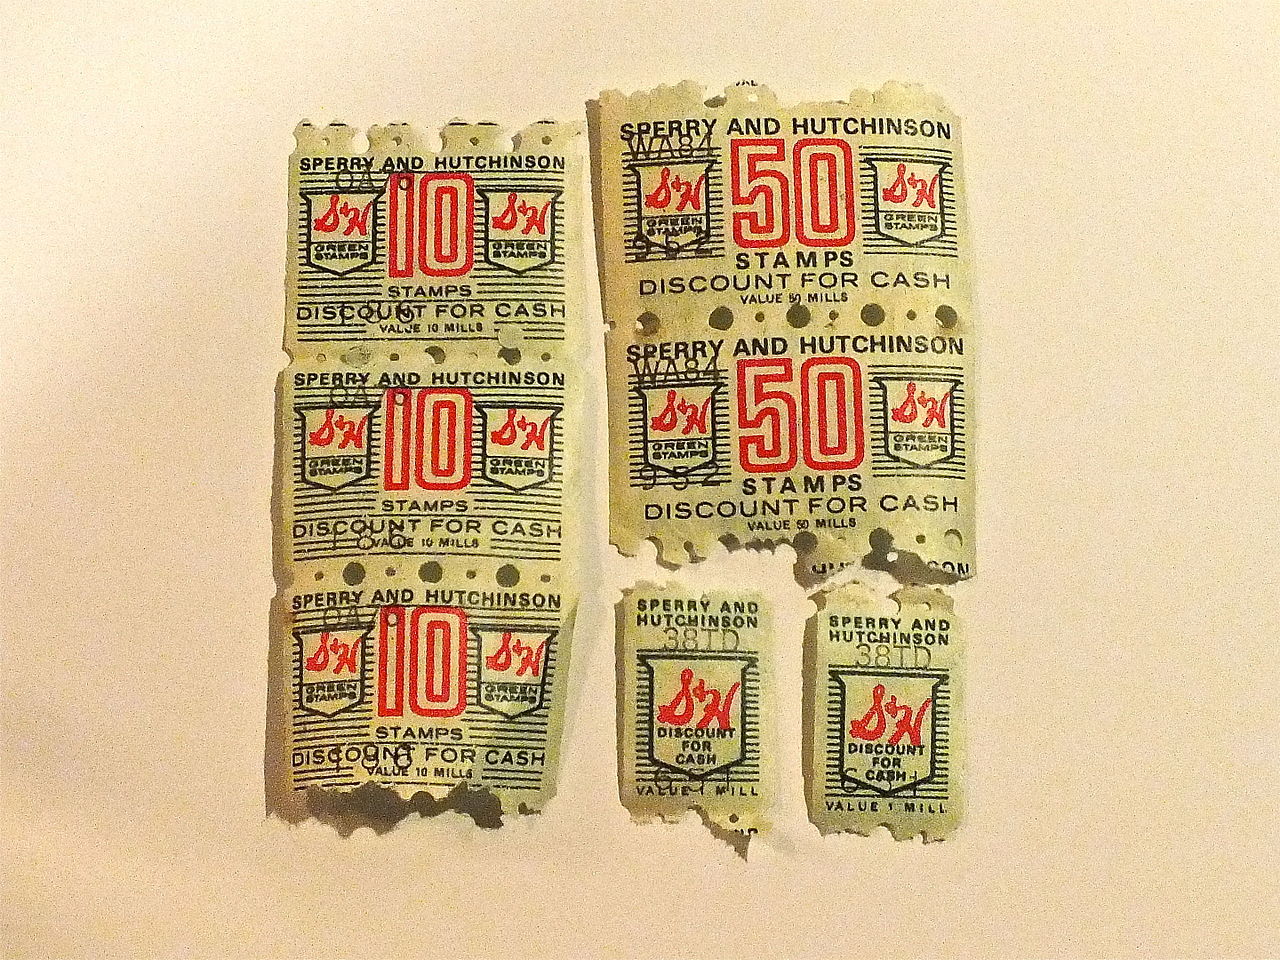 s&h green stamps